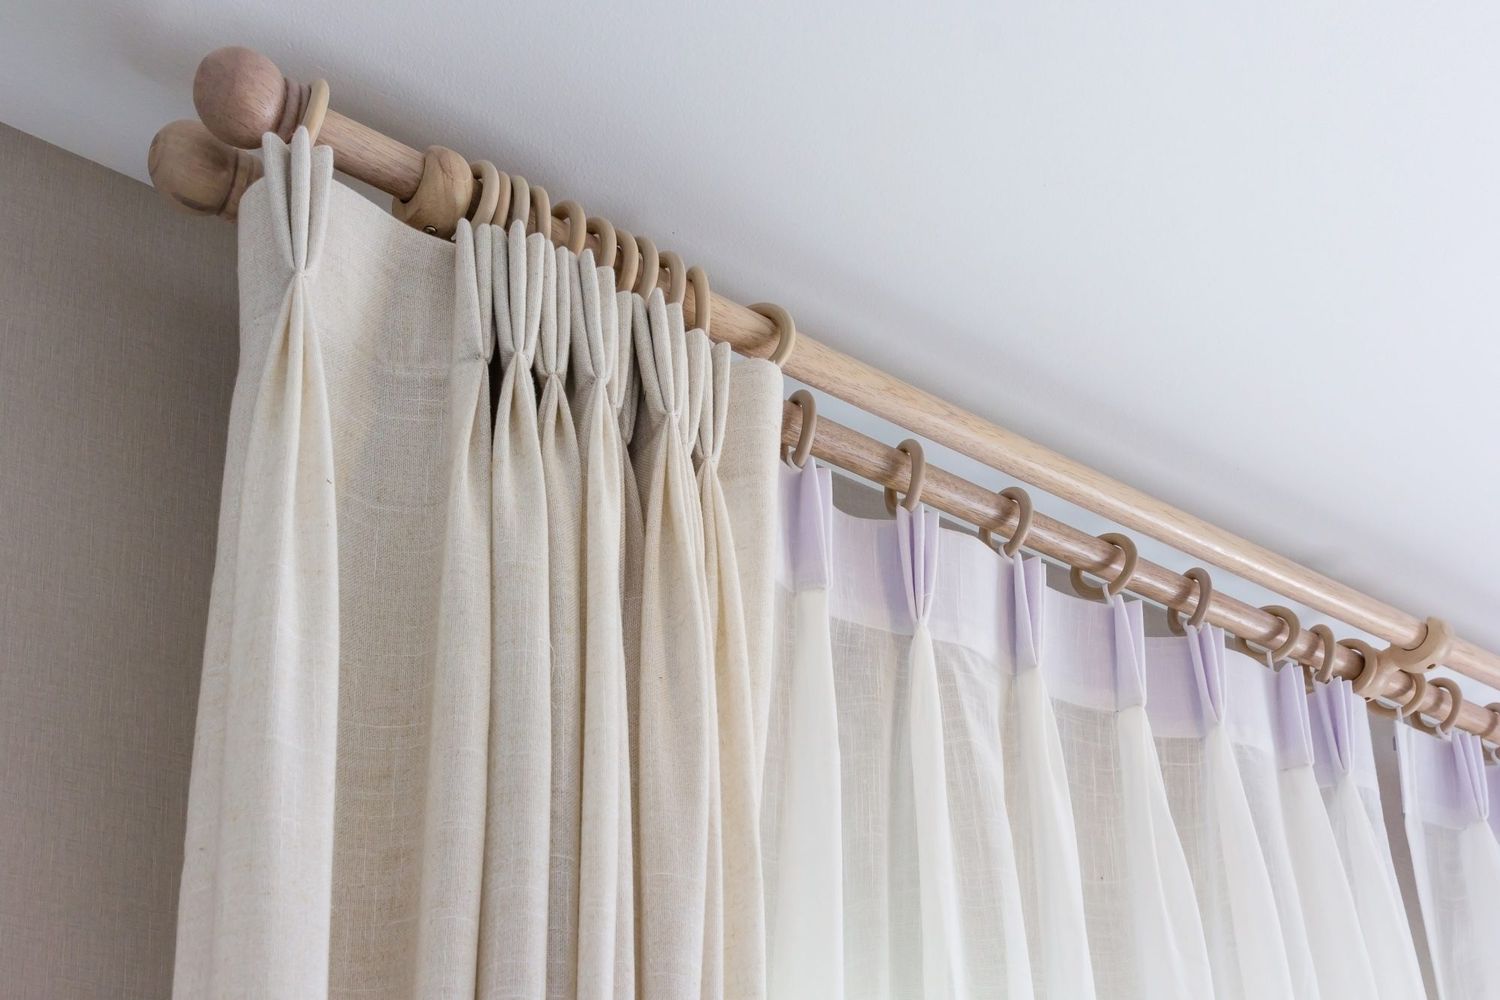  Cleaning-Curtain-Rod